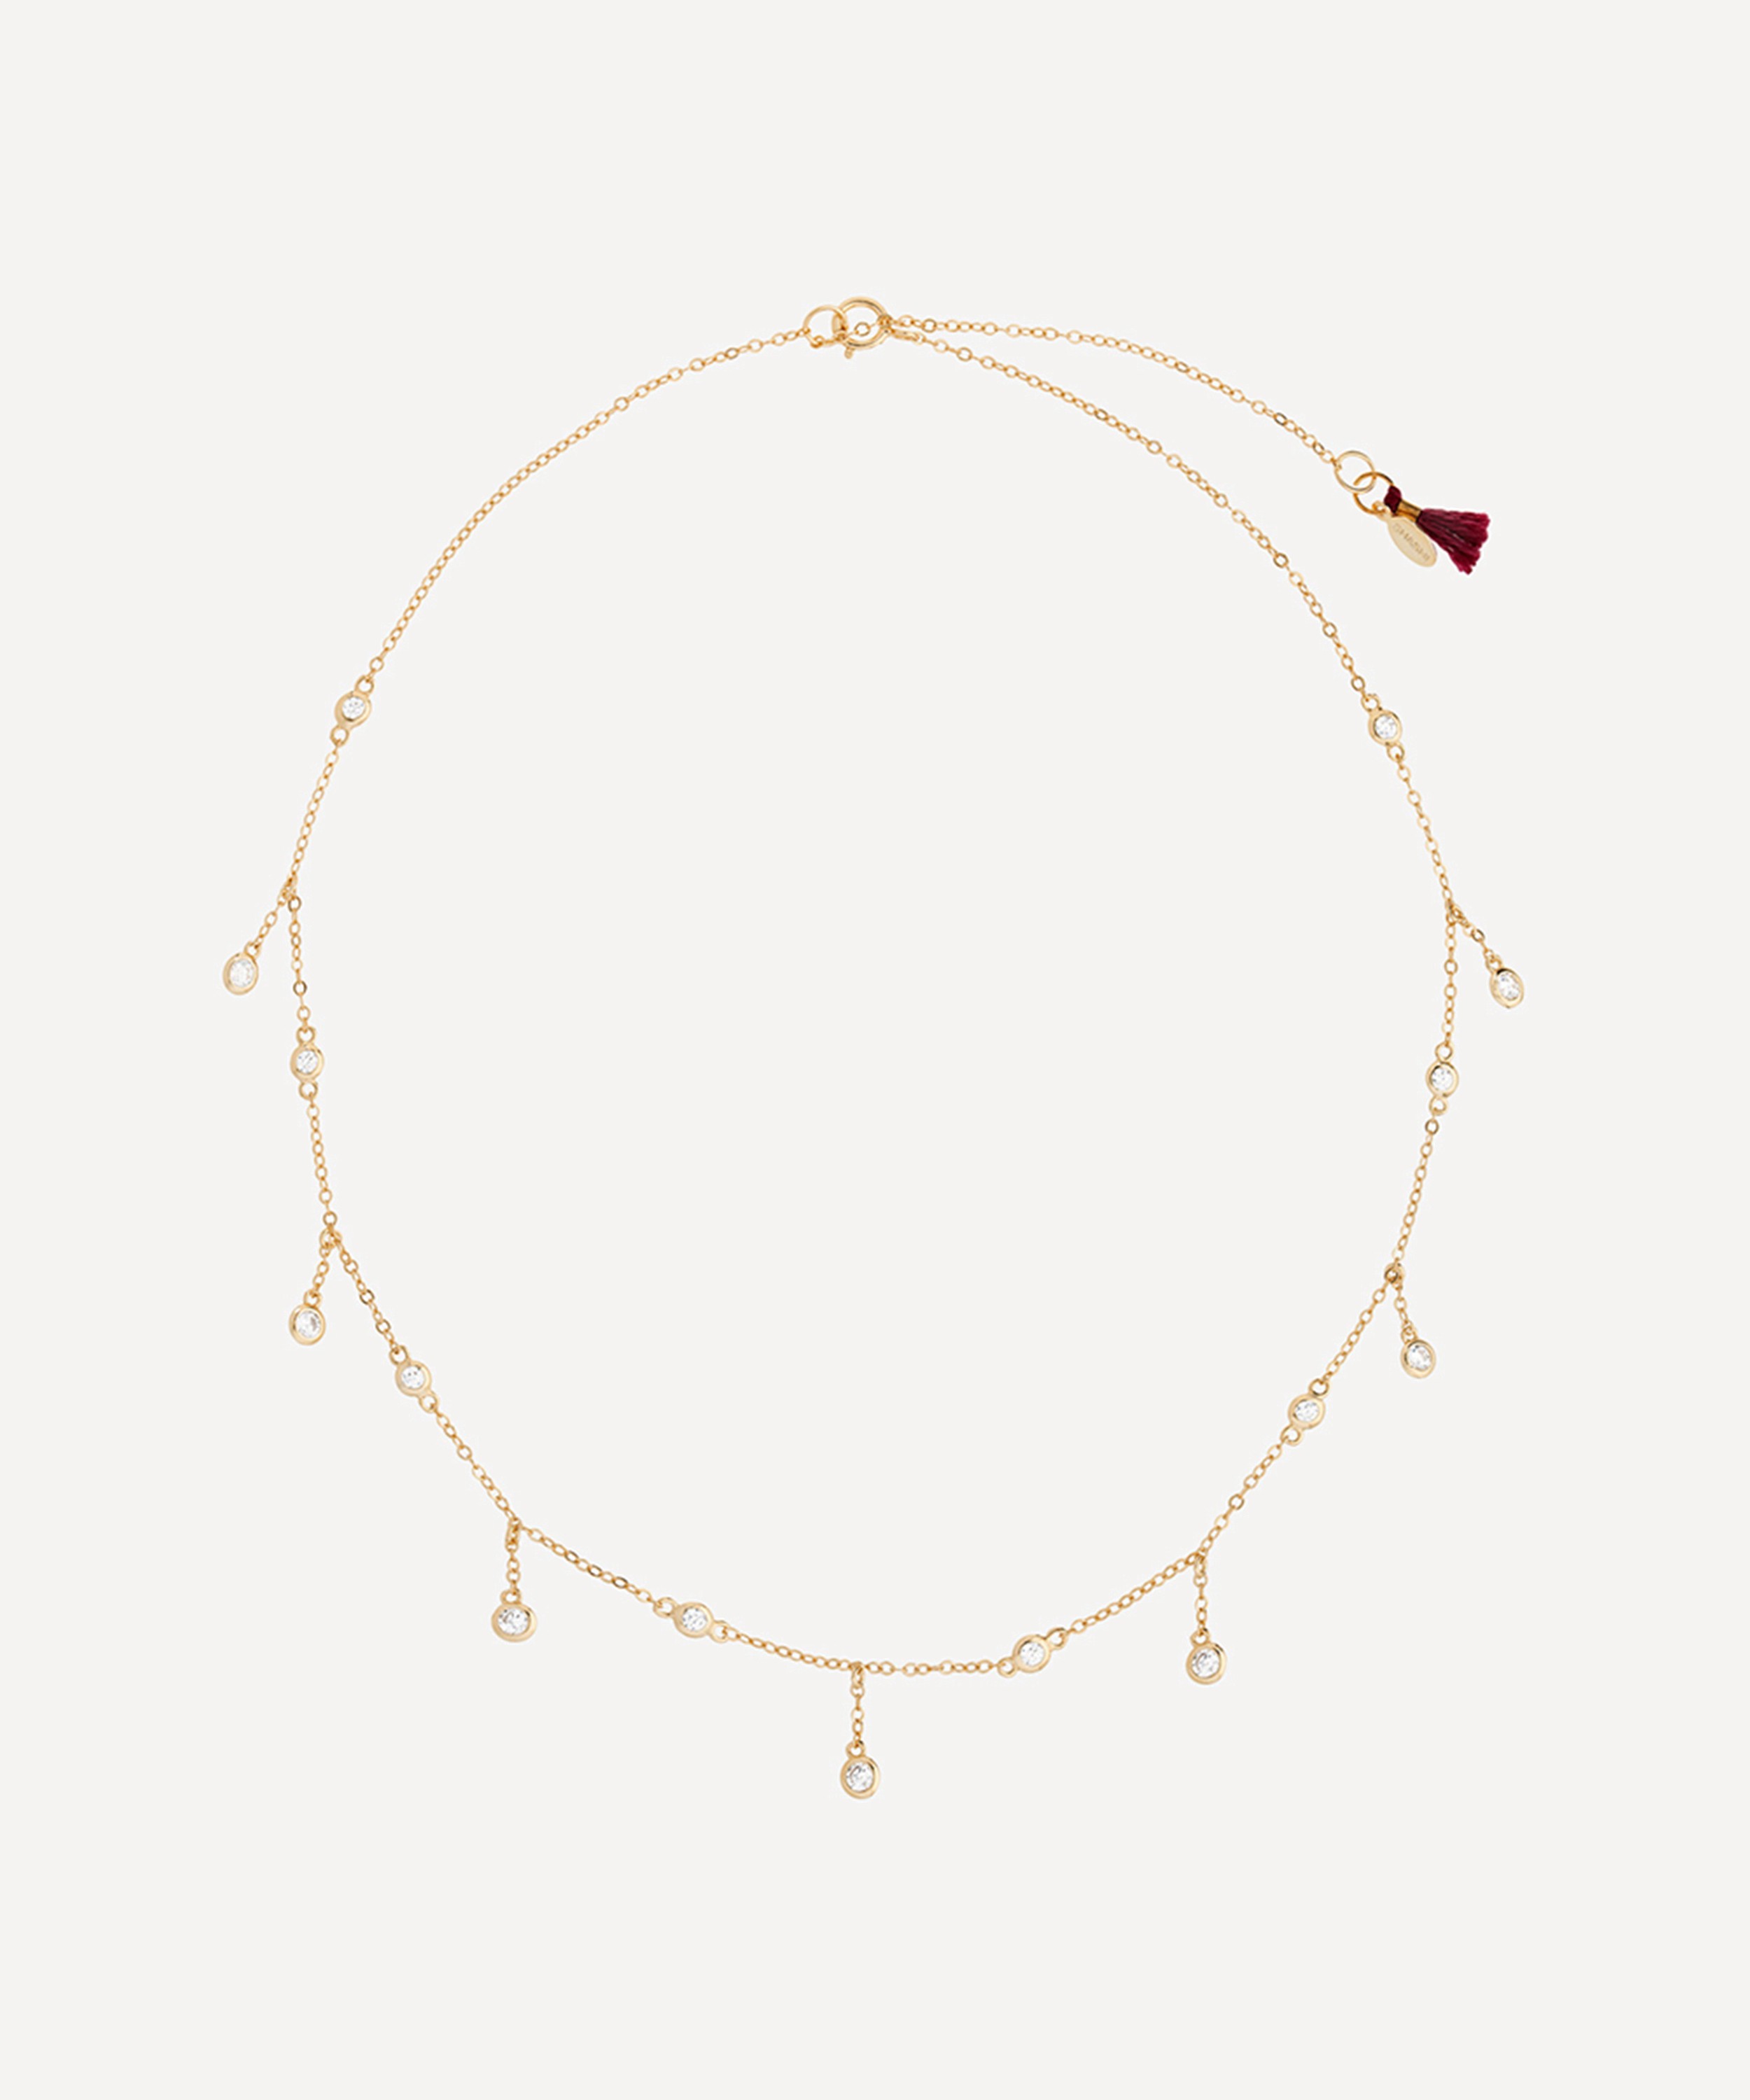 SHASHI - 14ct Gold-Plated Solitaire Drop Necklace